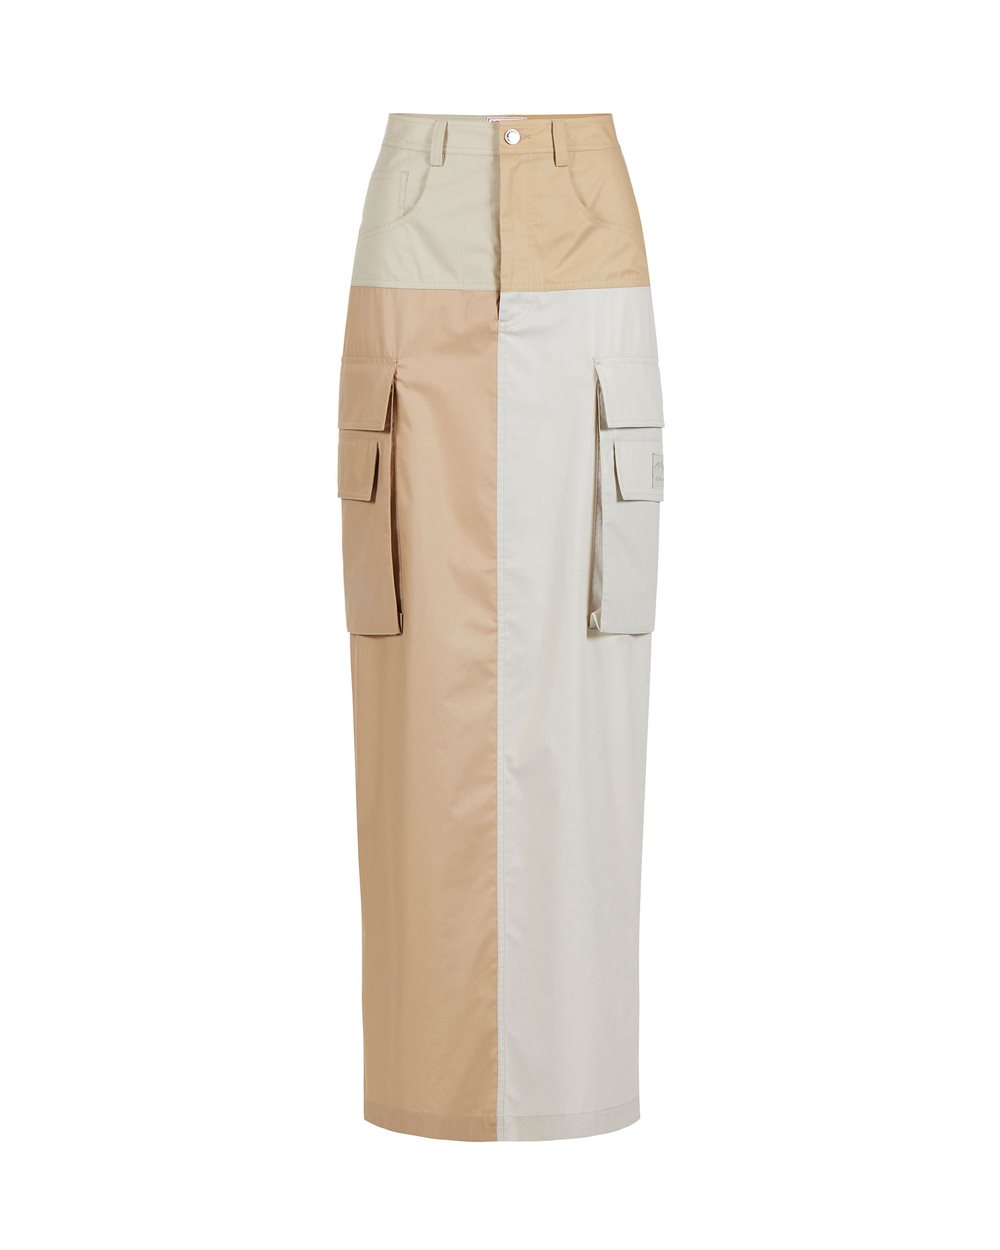 Color block long skirt - Fashion Show Woman | Iceberg - Official Website